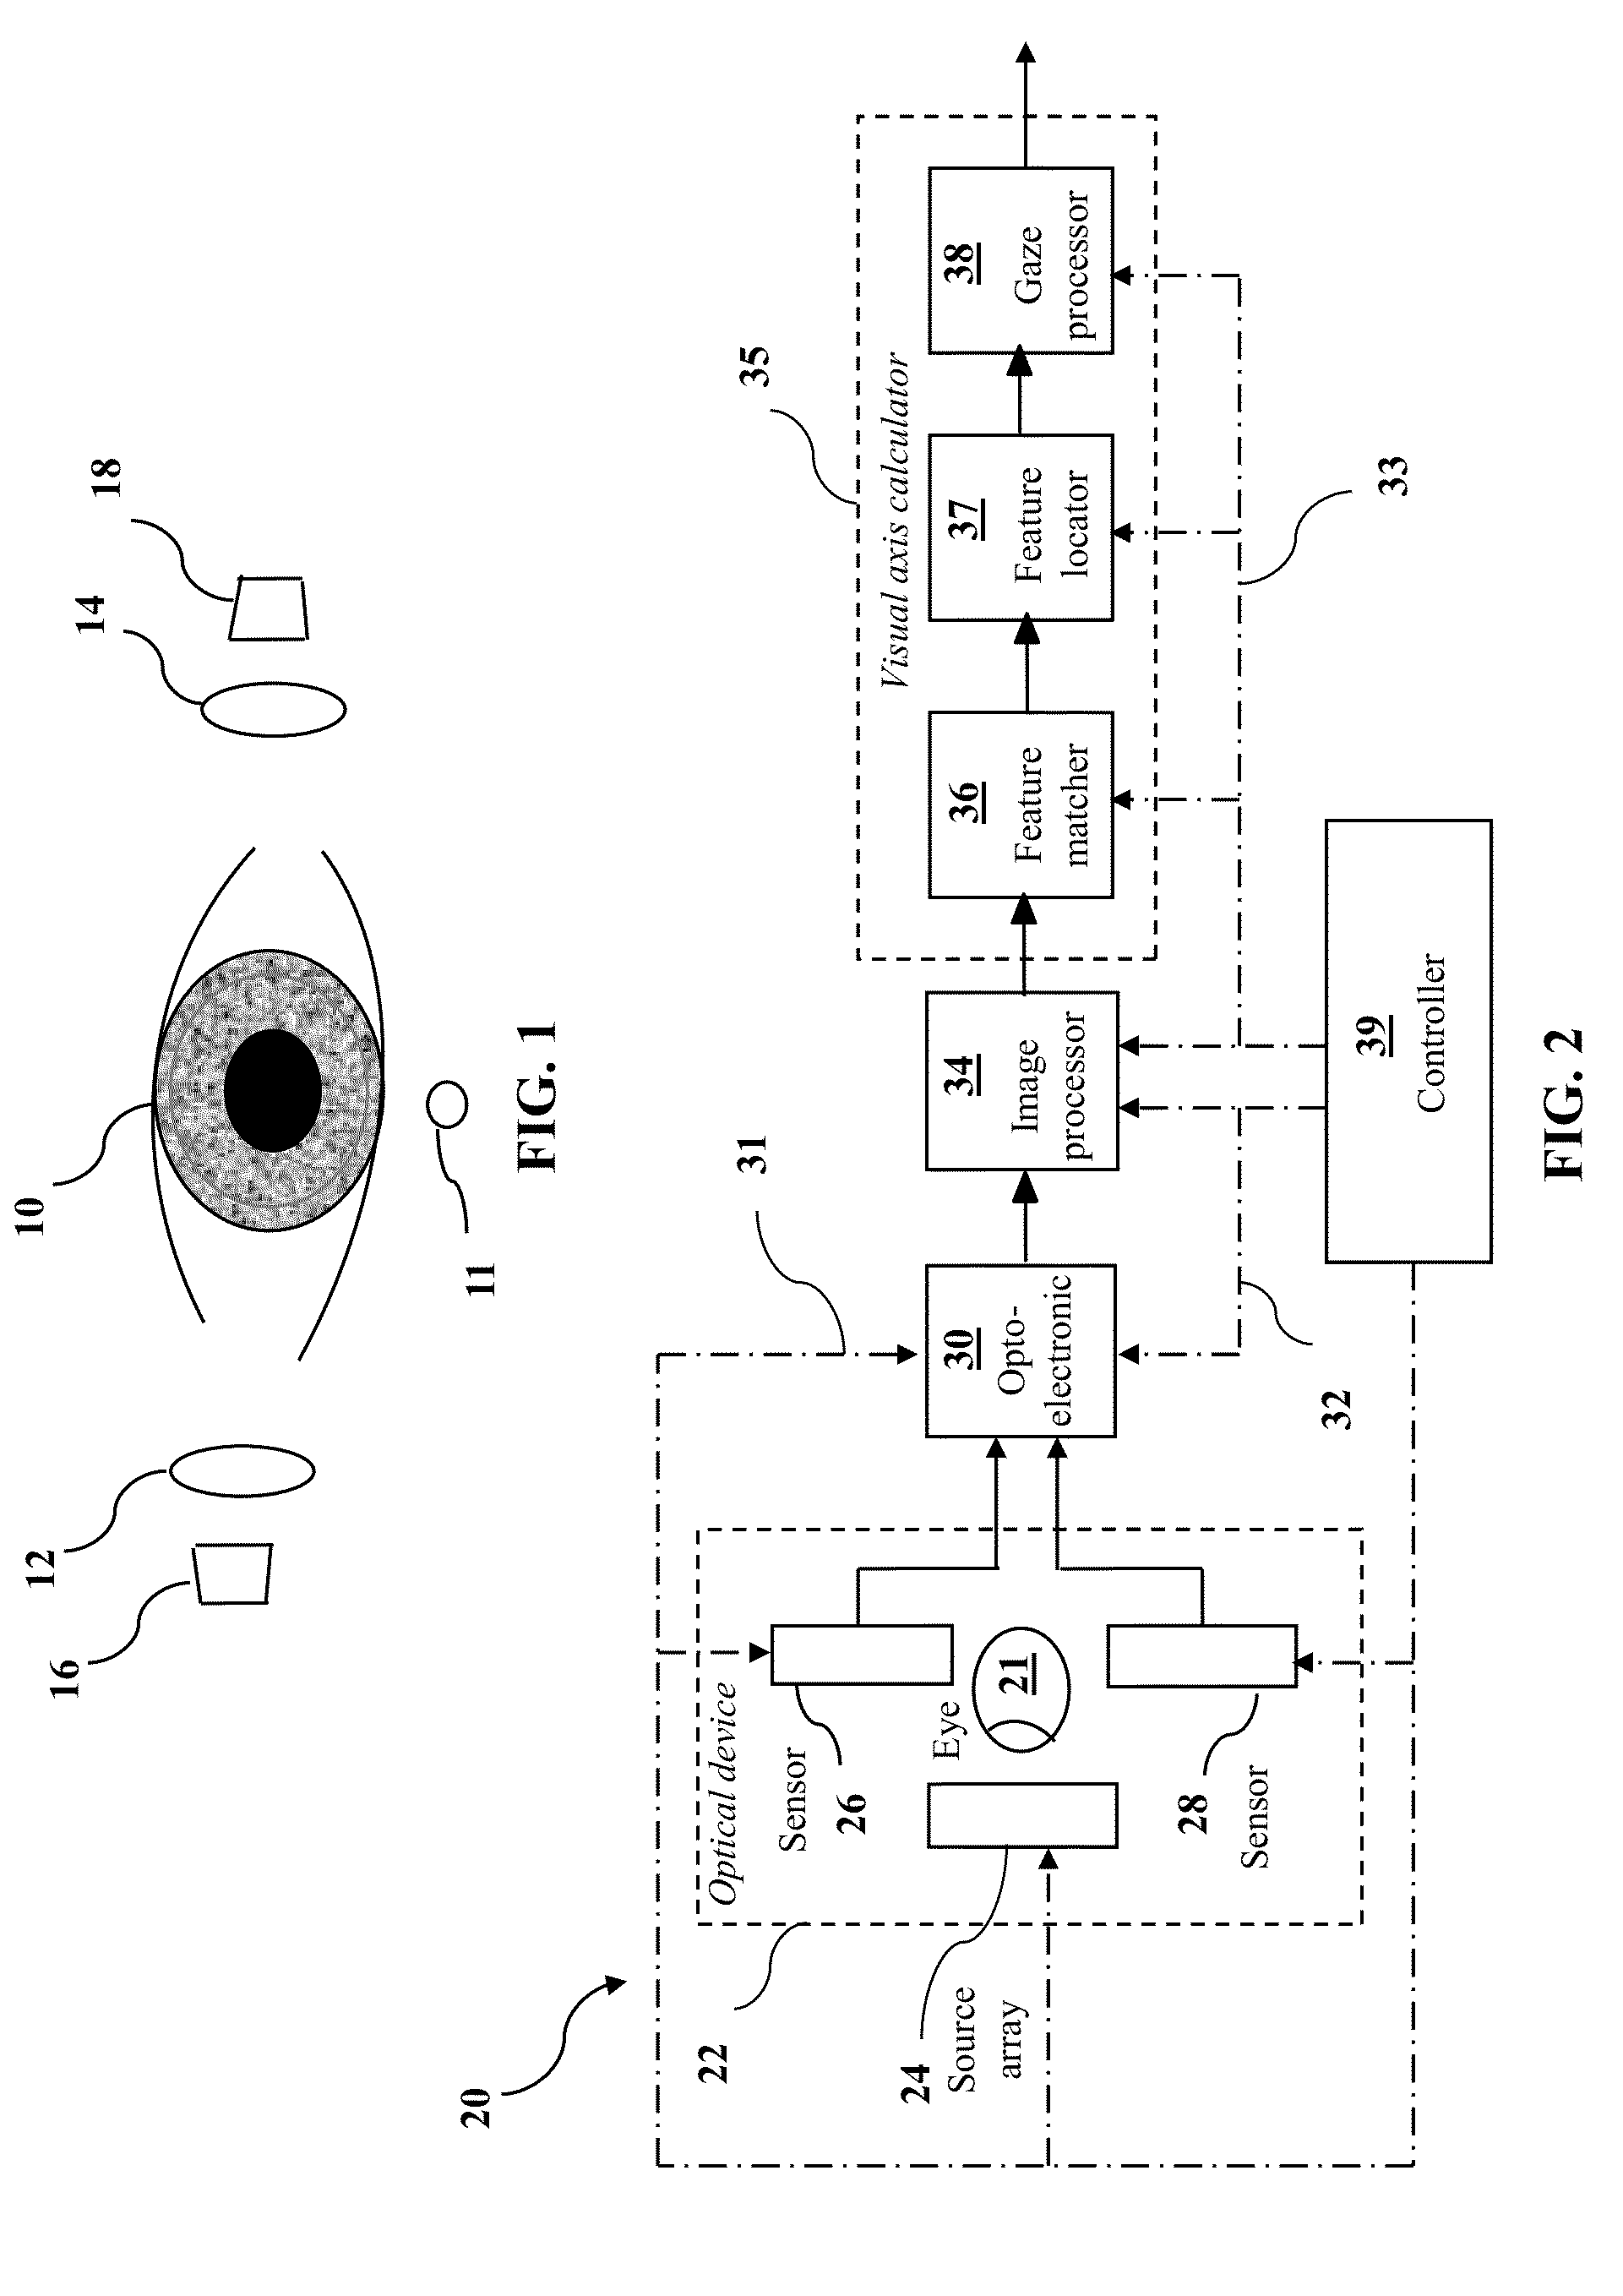 Apparatus and method for determining eye gaze from stereo-optic views